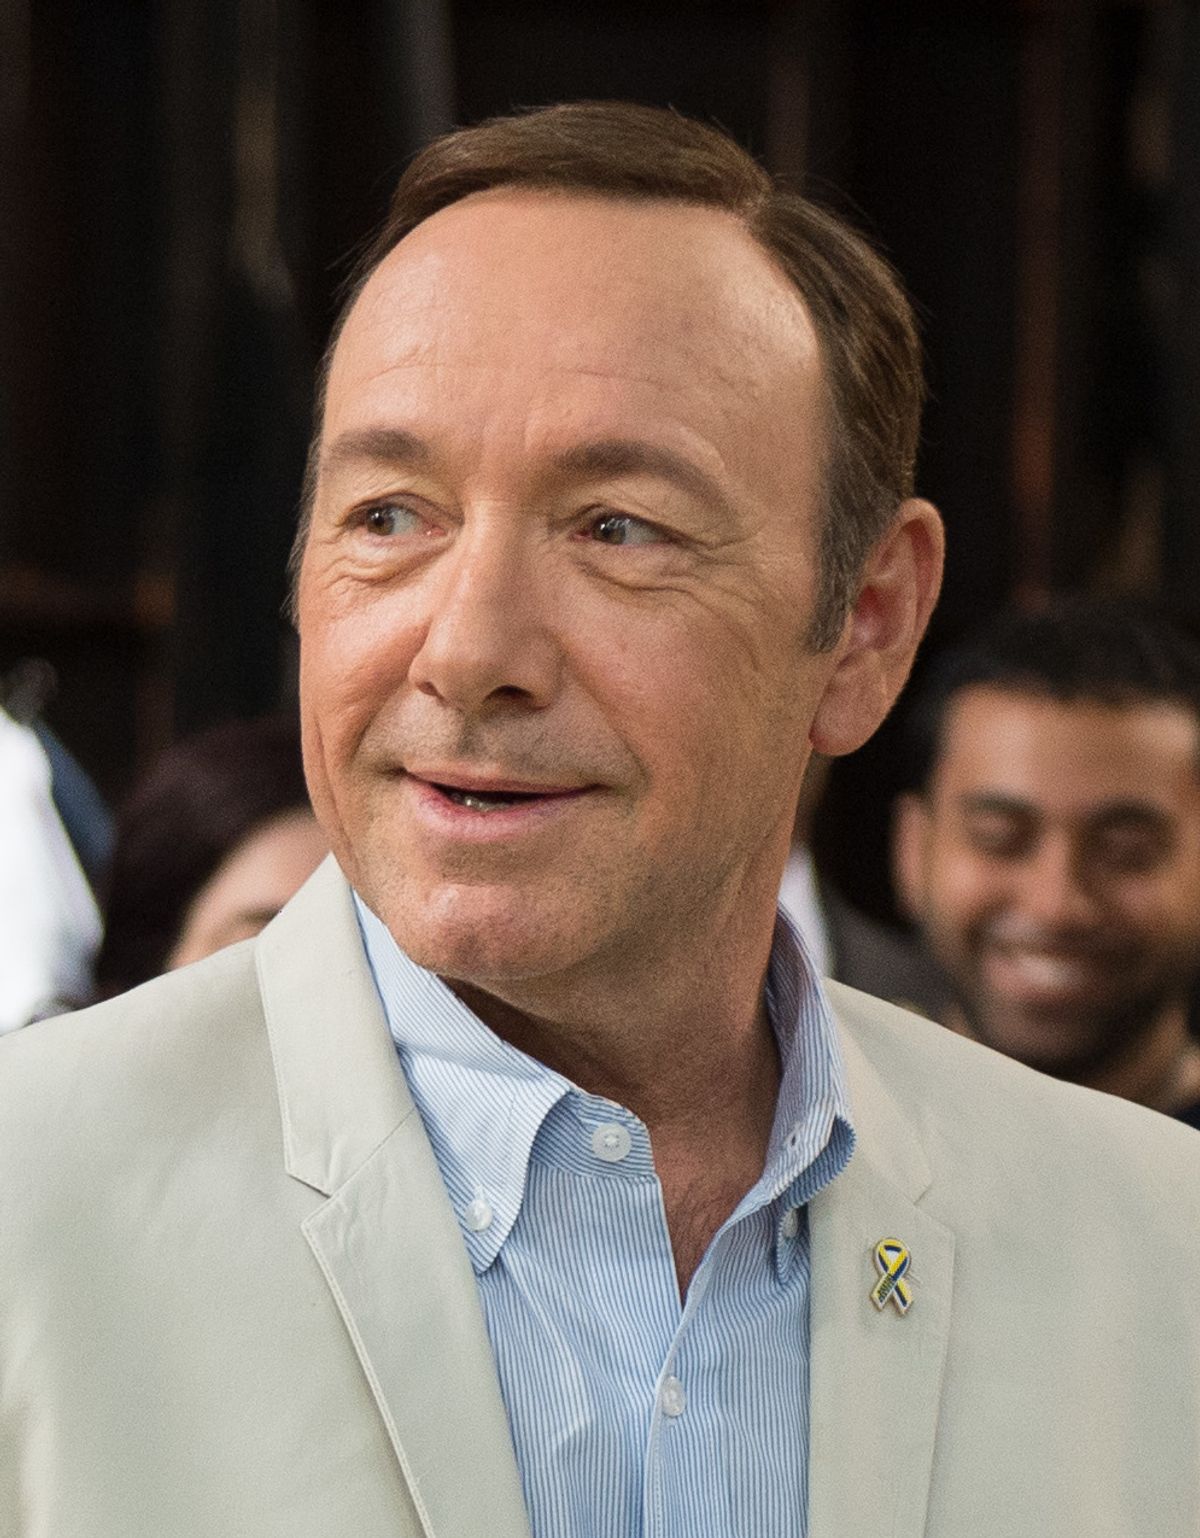 A portrait of actor Kevin Spacey is due to go on show at the Victoria and Albert Museum in London Wiki Commons